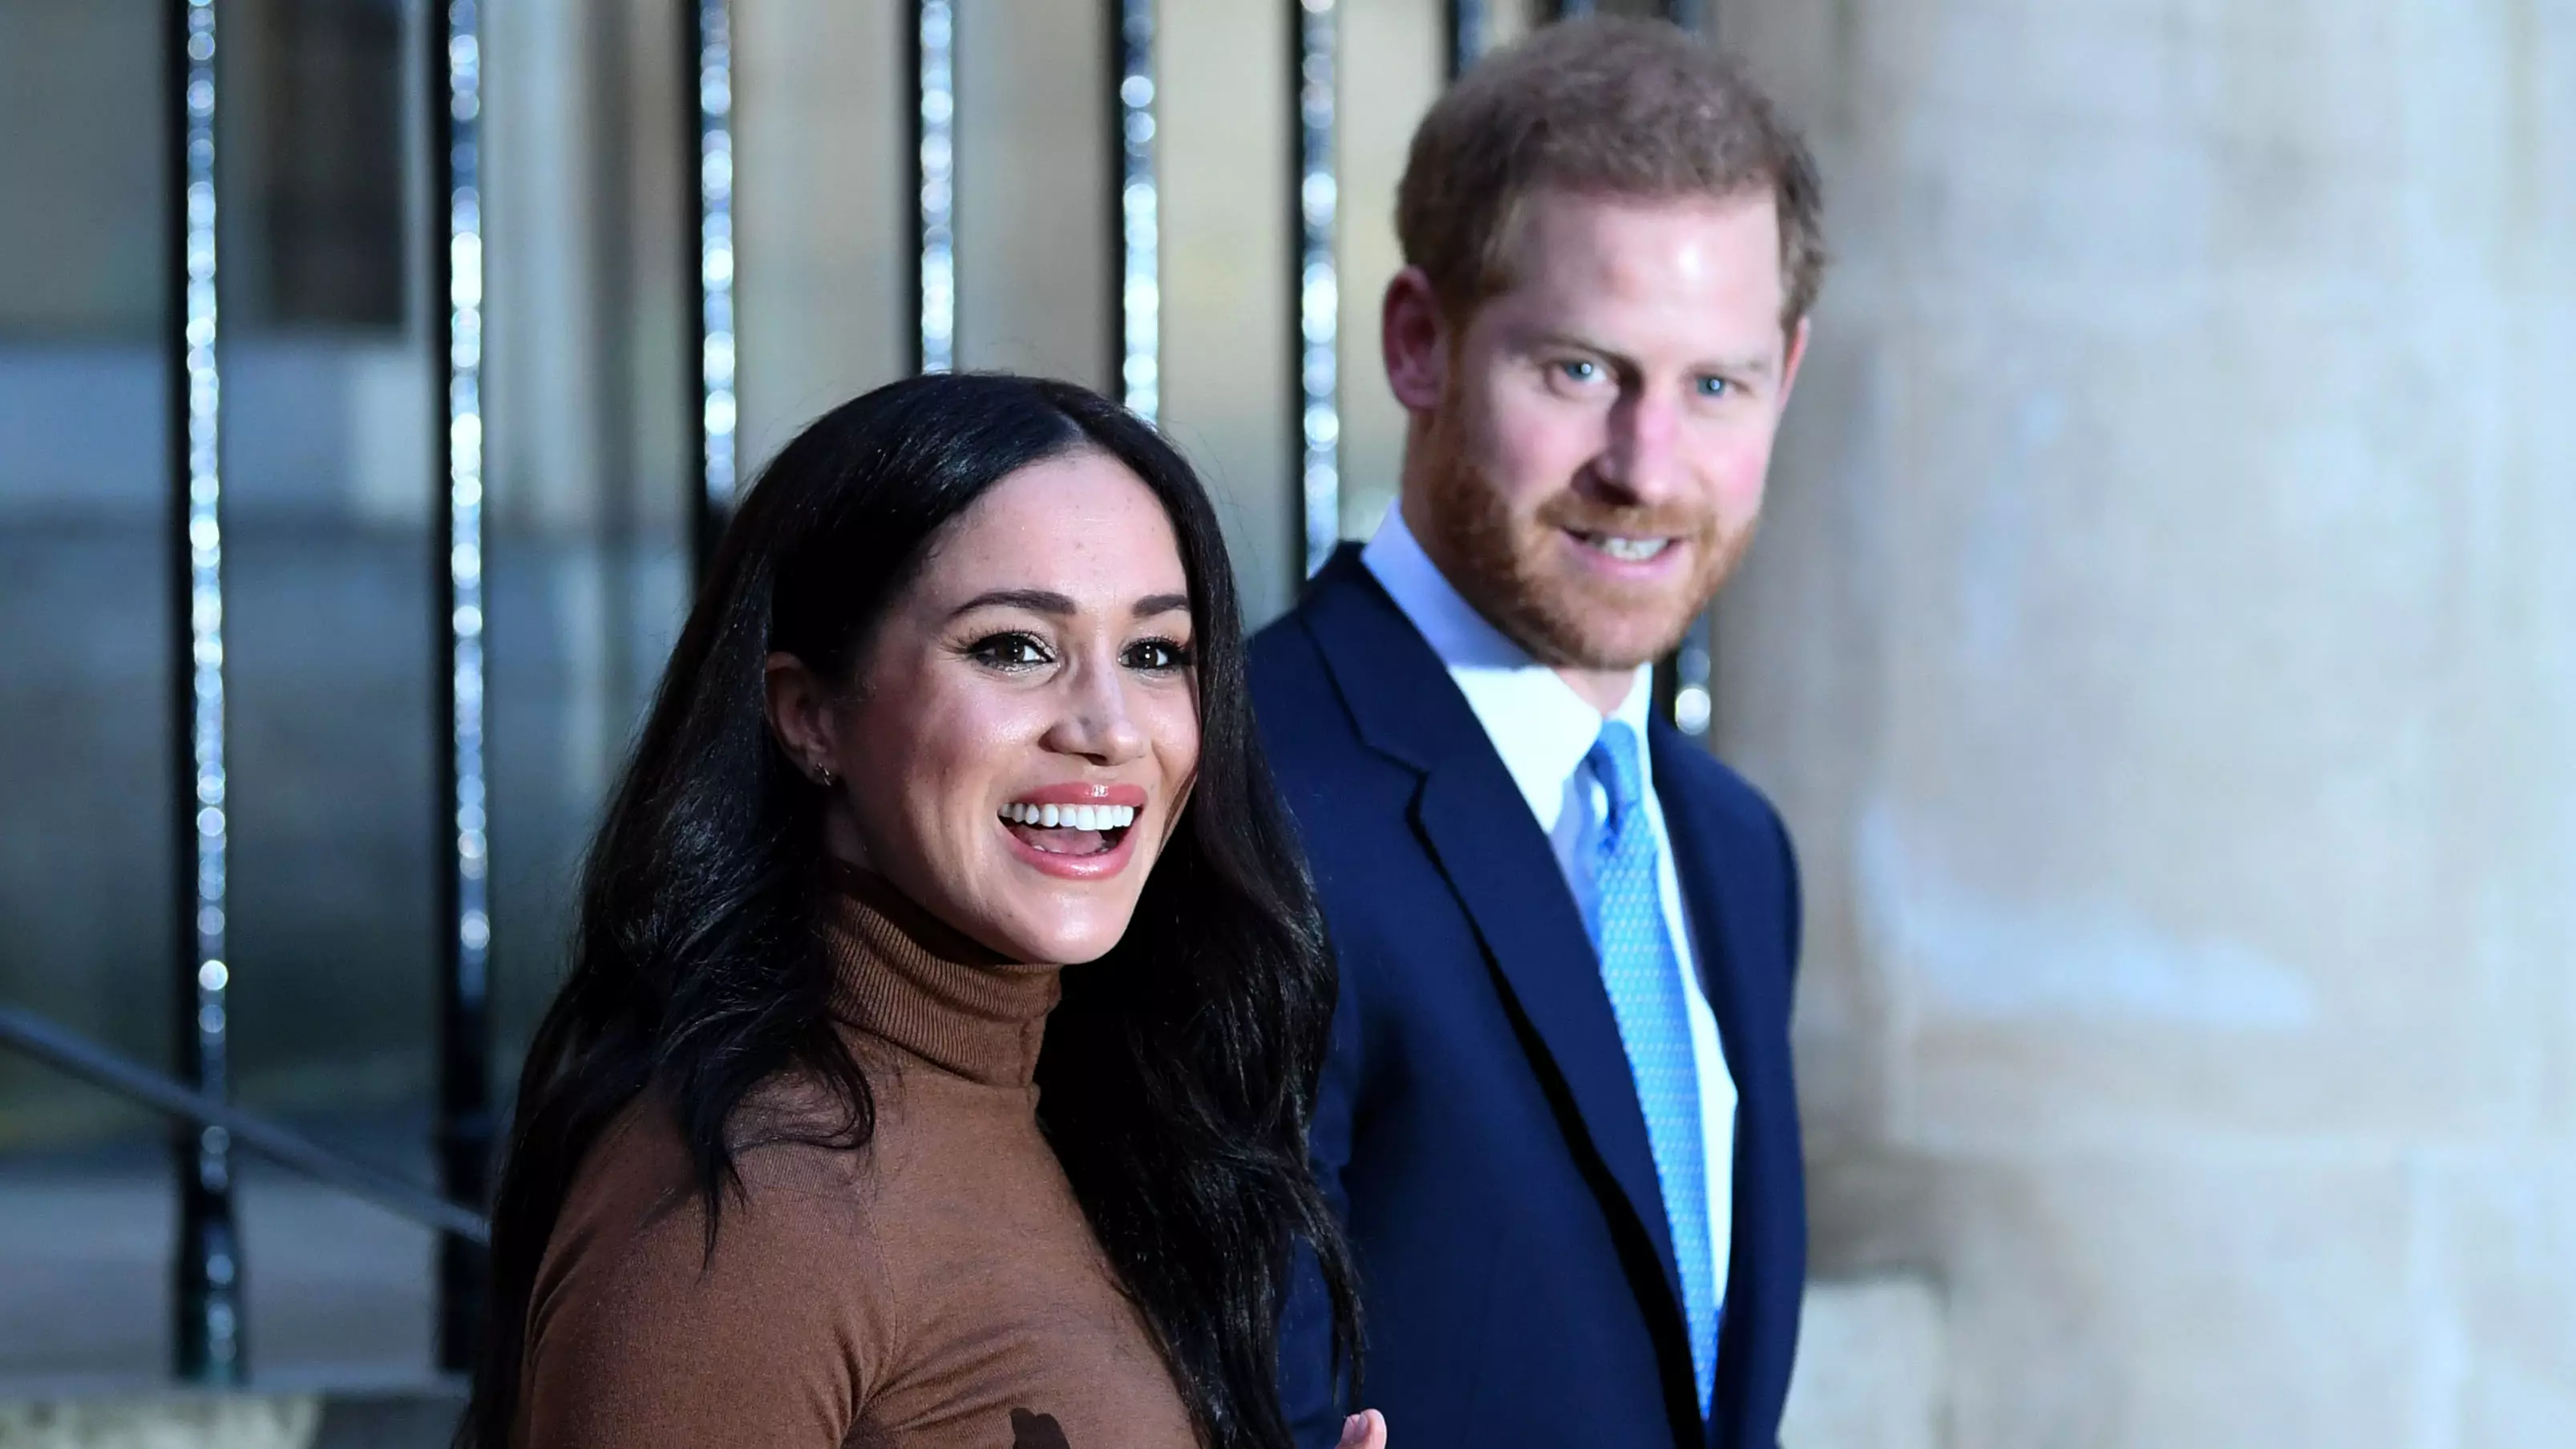 Prince Harry And Meghan Markle To Step Back From Royal Duties To Work